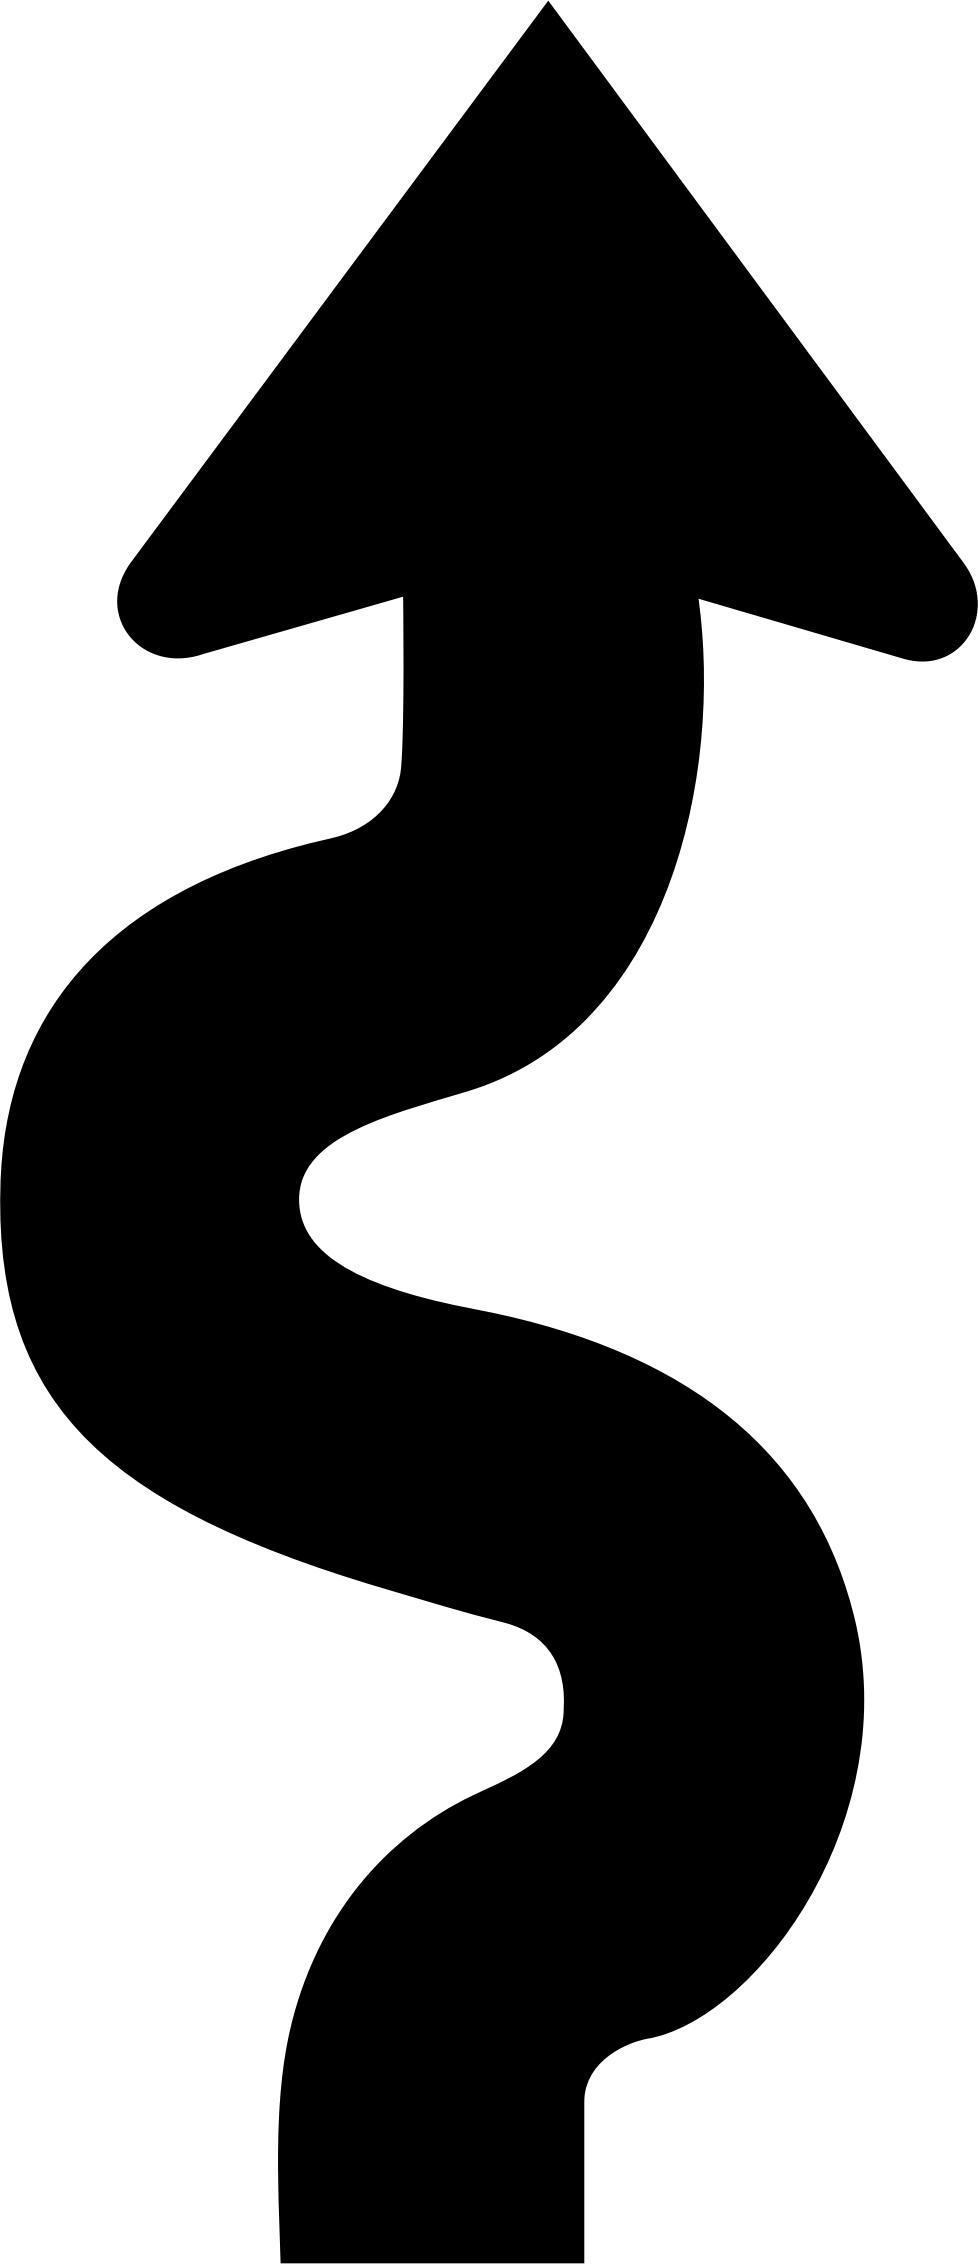 Squiggly Road Sign Arrow png transparent